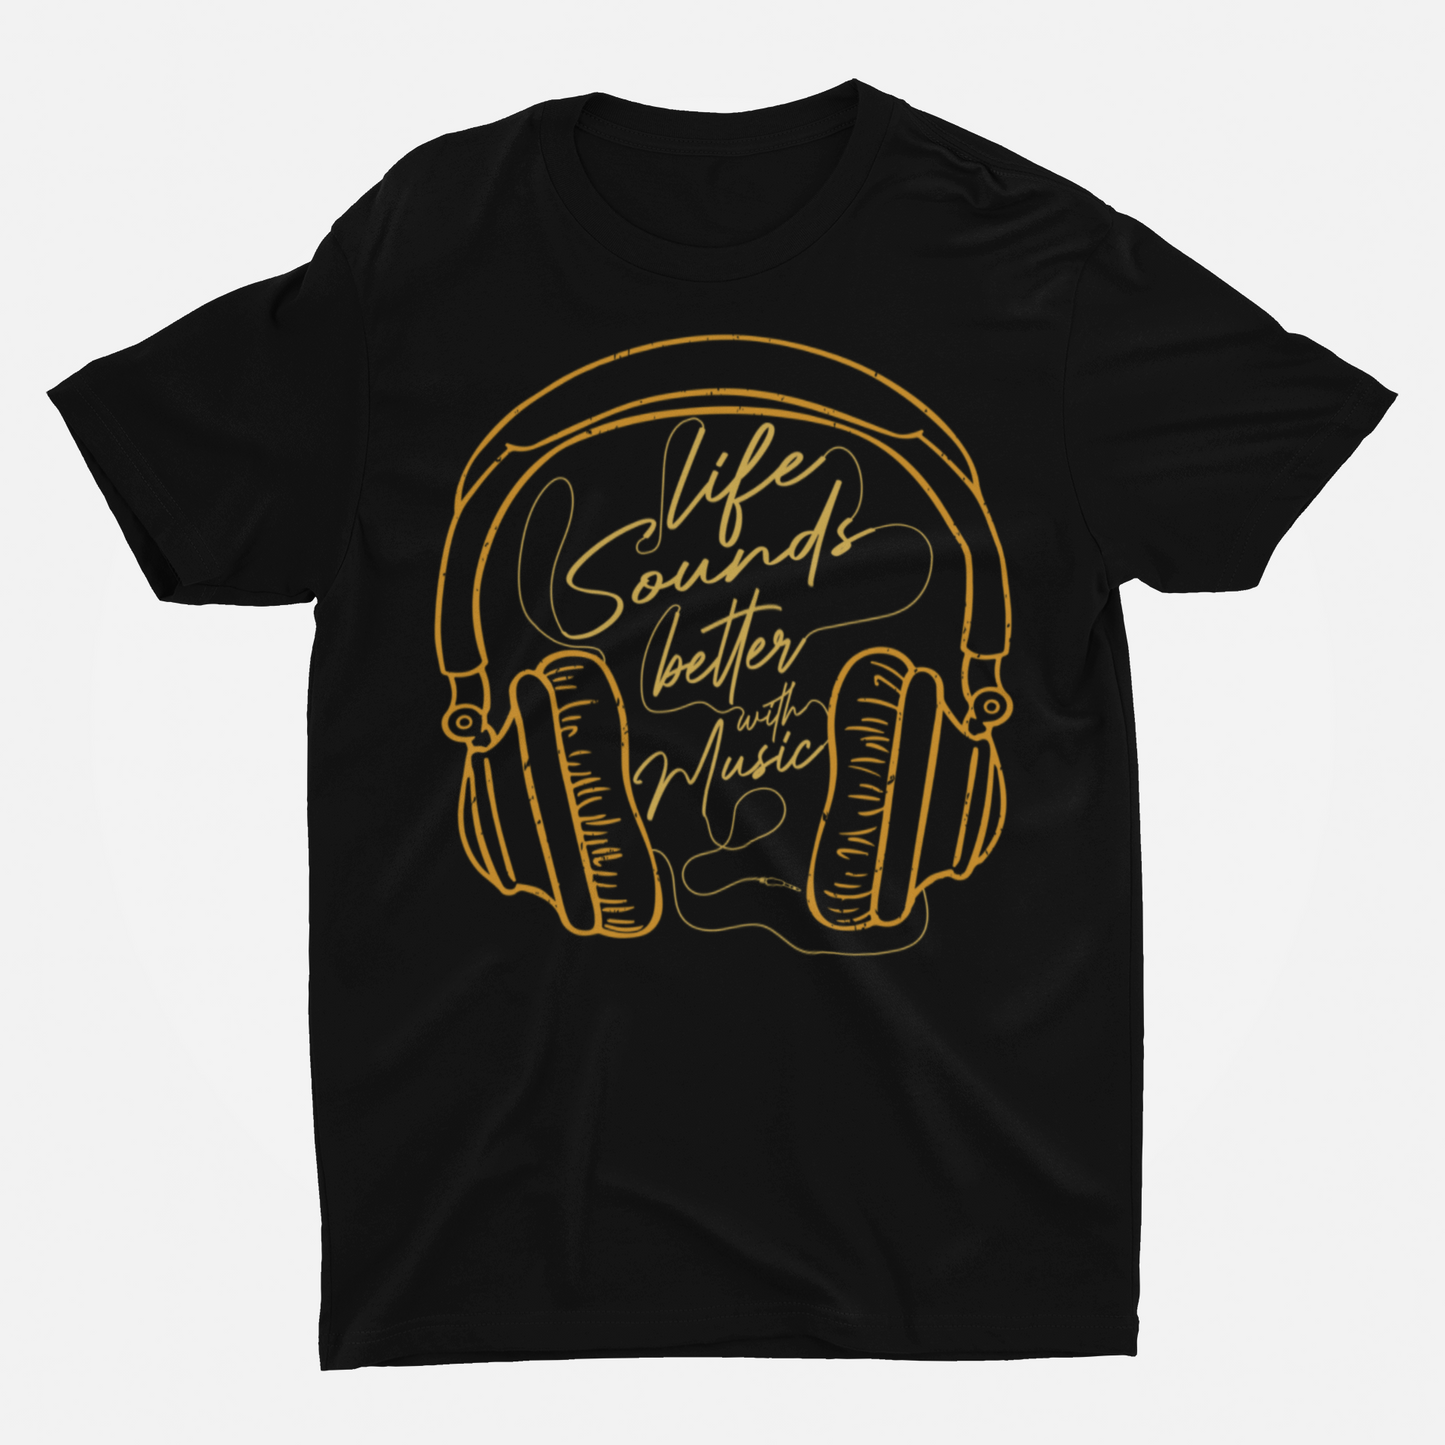 Life Sounds Better With Music Black Round Neck T-Shirt for Men